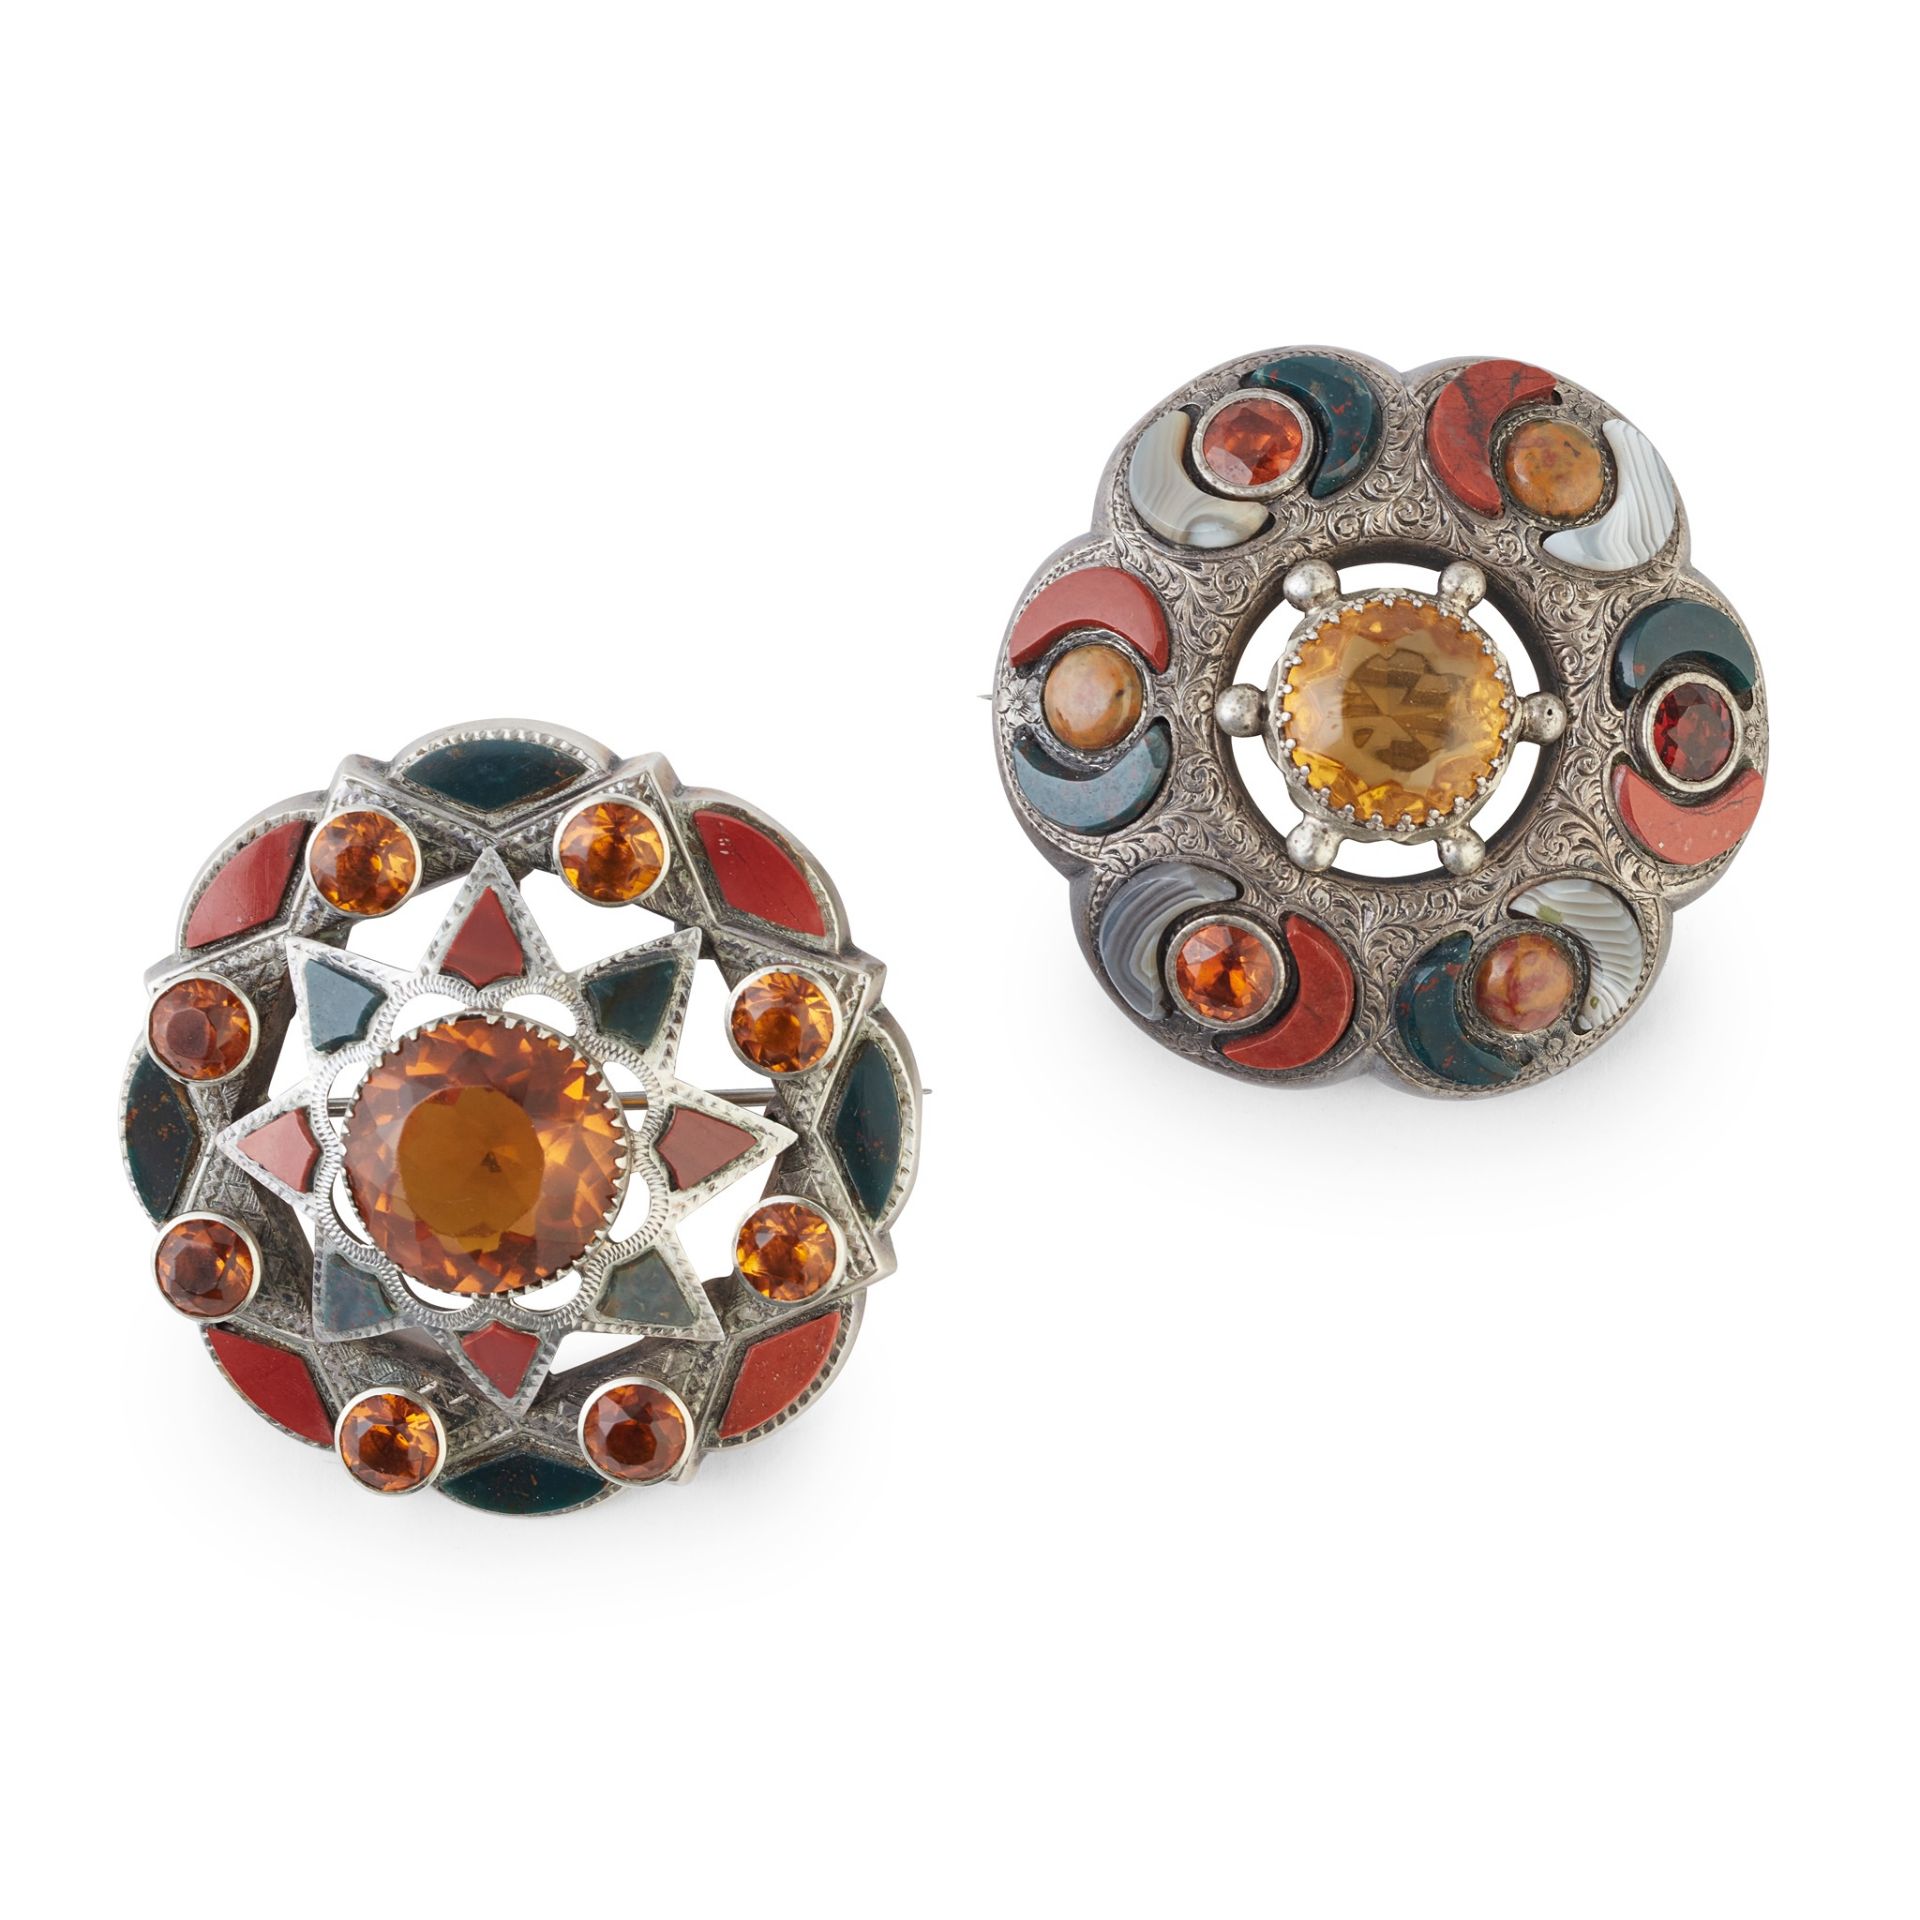 TWO AGATE AND PASTE SET BROOCHES